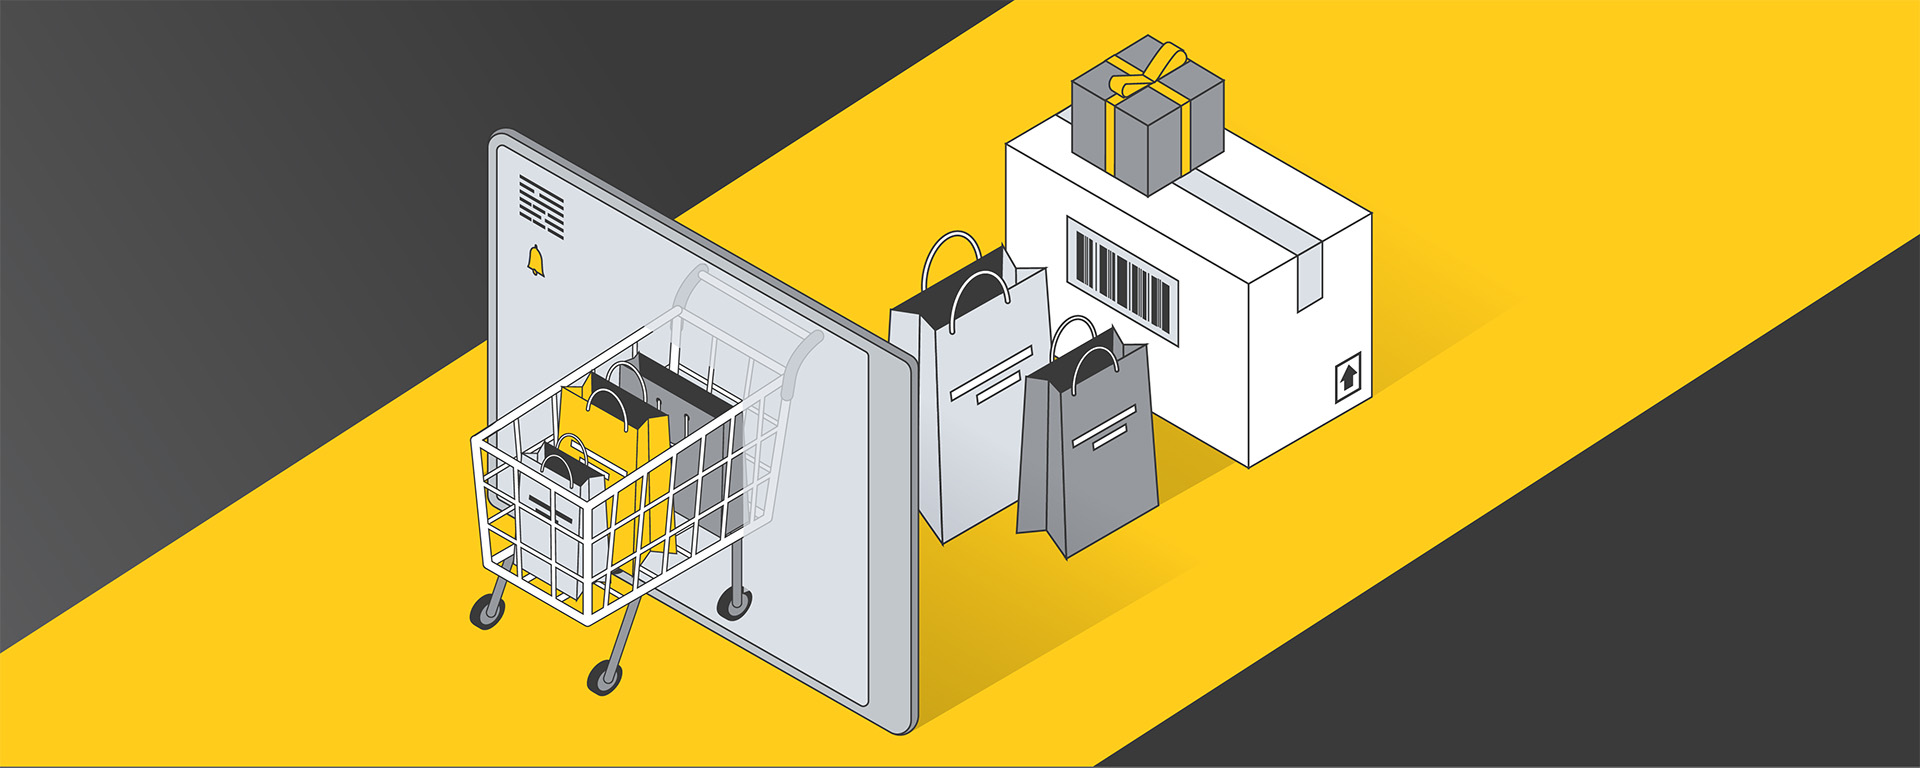 An isometric graphic showing a shopping cart filled with packages moving towards a small warehouse for dispatch on a yellow and gray background, illustrating the dynamics of Retail Media Networks.